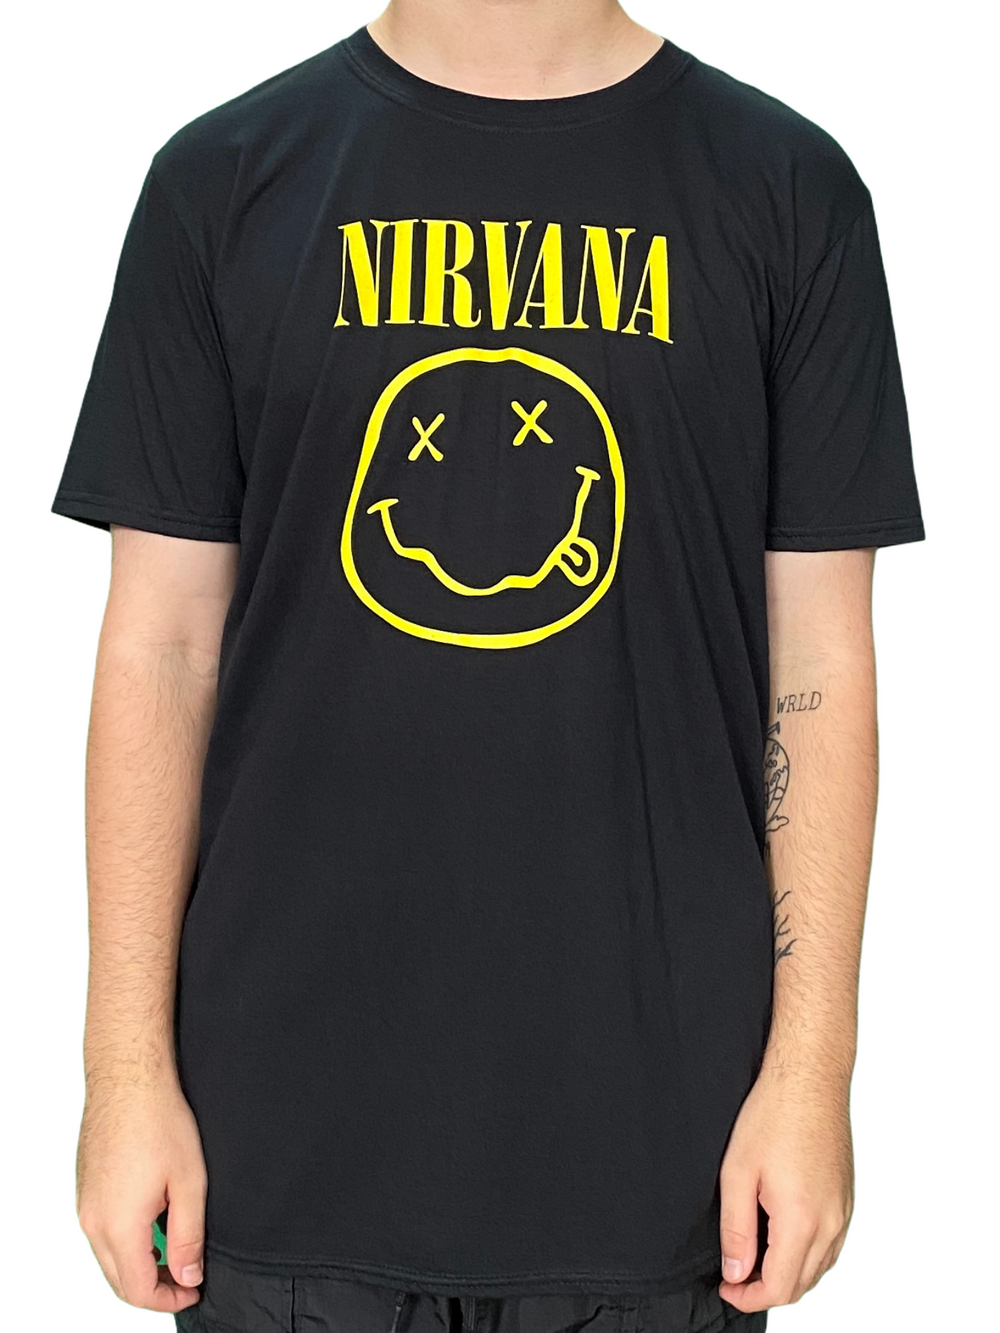 Nirvana Yellow Smiley Unisex Official T Shirt Brand New Various Sizes NO BACK PRINT